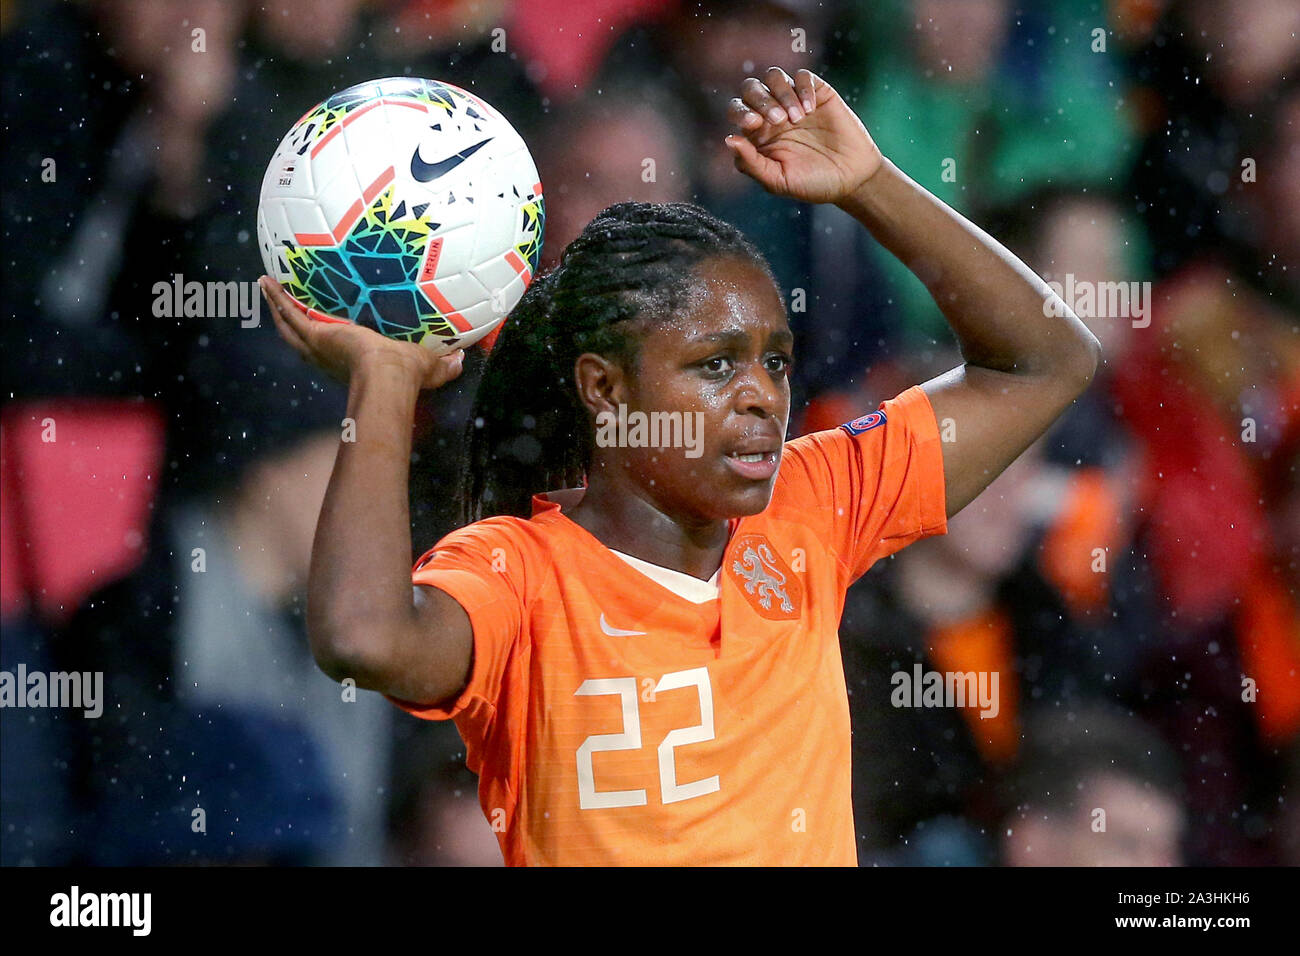 Eindhoven, Nederlands. 08th Oct, 2019. EINDHOVEN, 08-10-2019, Philips stadium, Qualifying round - Group A, Netherlands - Russia (Women), season 2019/2020, Netherlands player Liza van der Most during throw-in during the game Netherlands - Russia (Women). Credit: Pro Shots/Alamy Live News Stock Photo